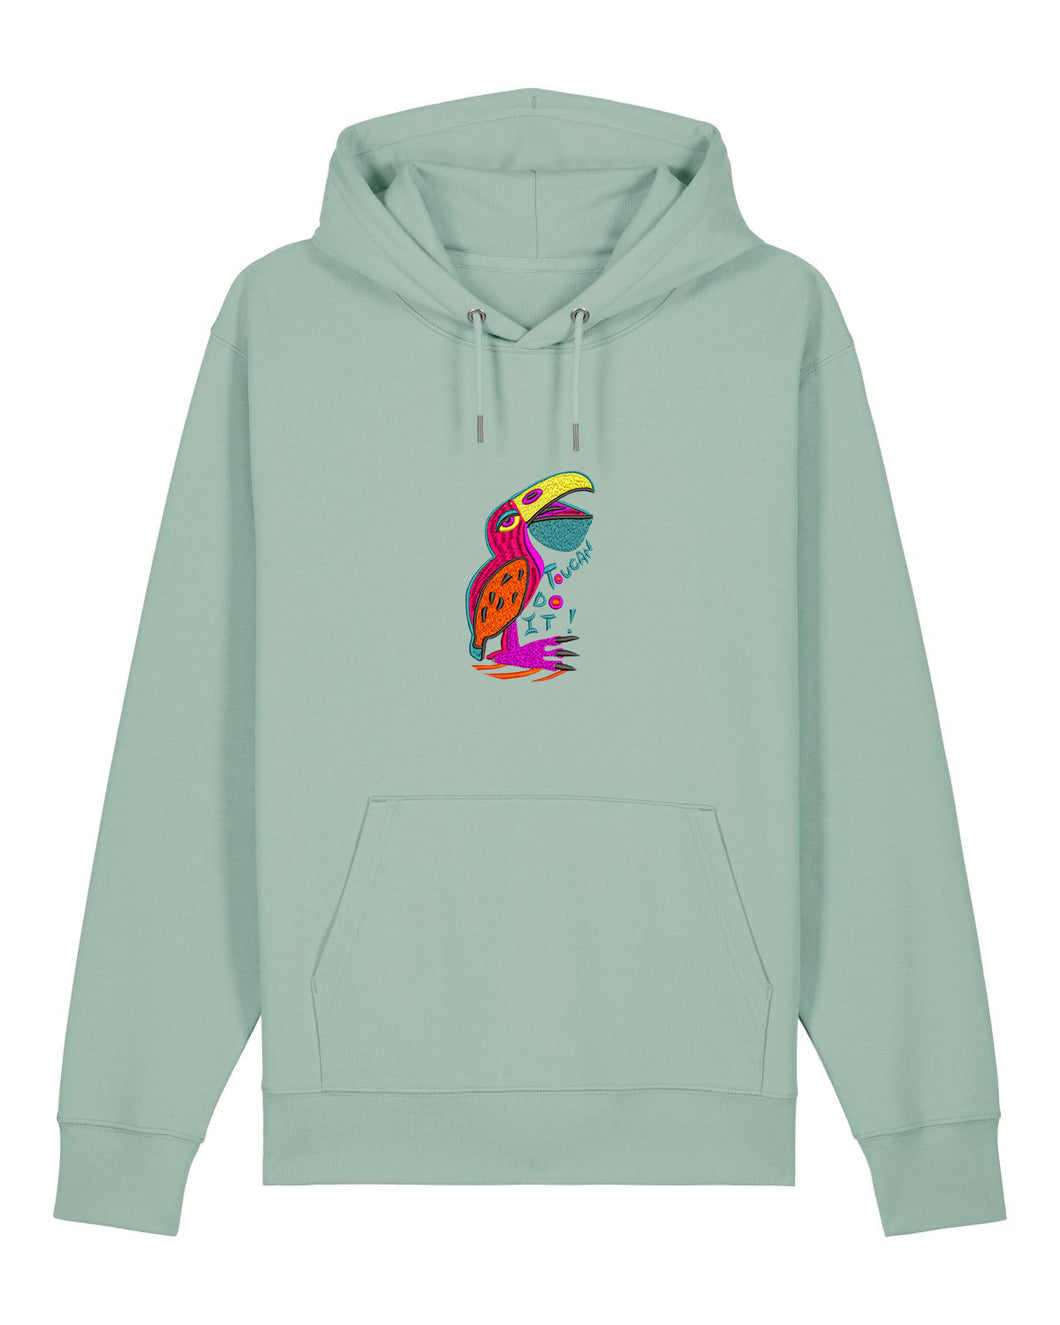 TOUCAN do it! 🐦 - Embroidered UNISEX hoodie